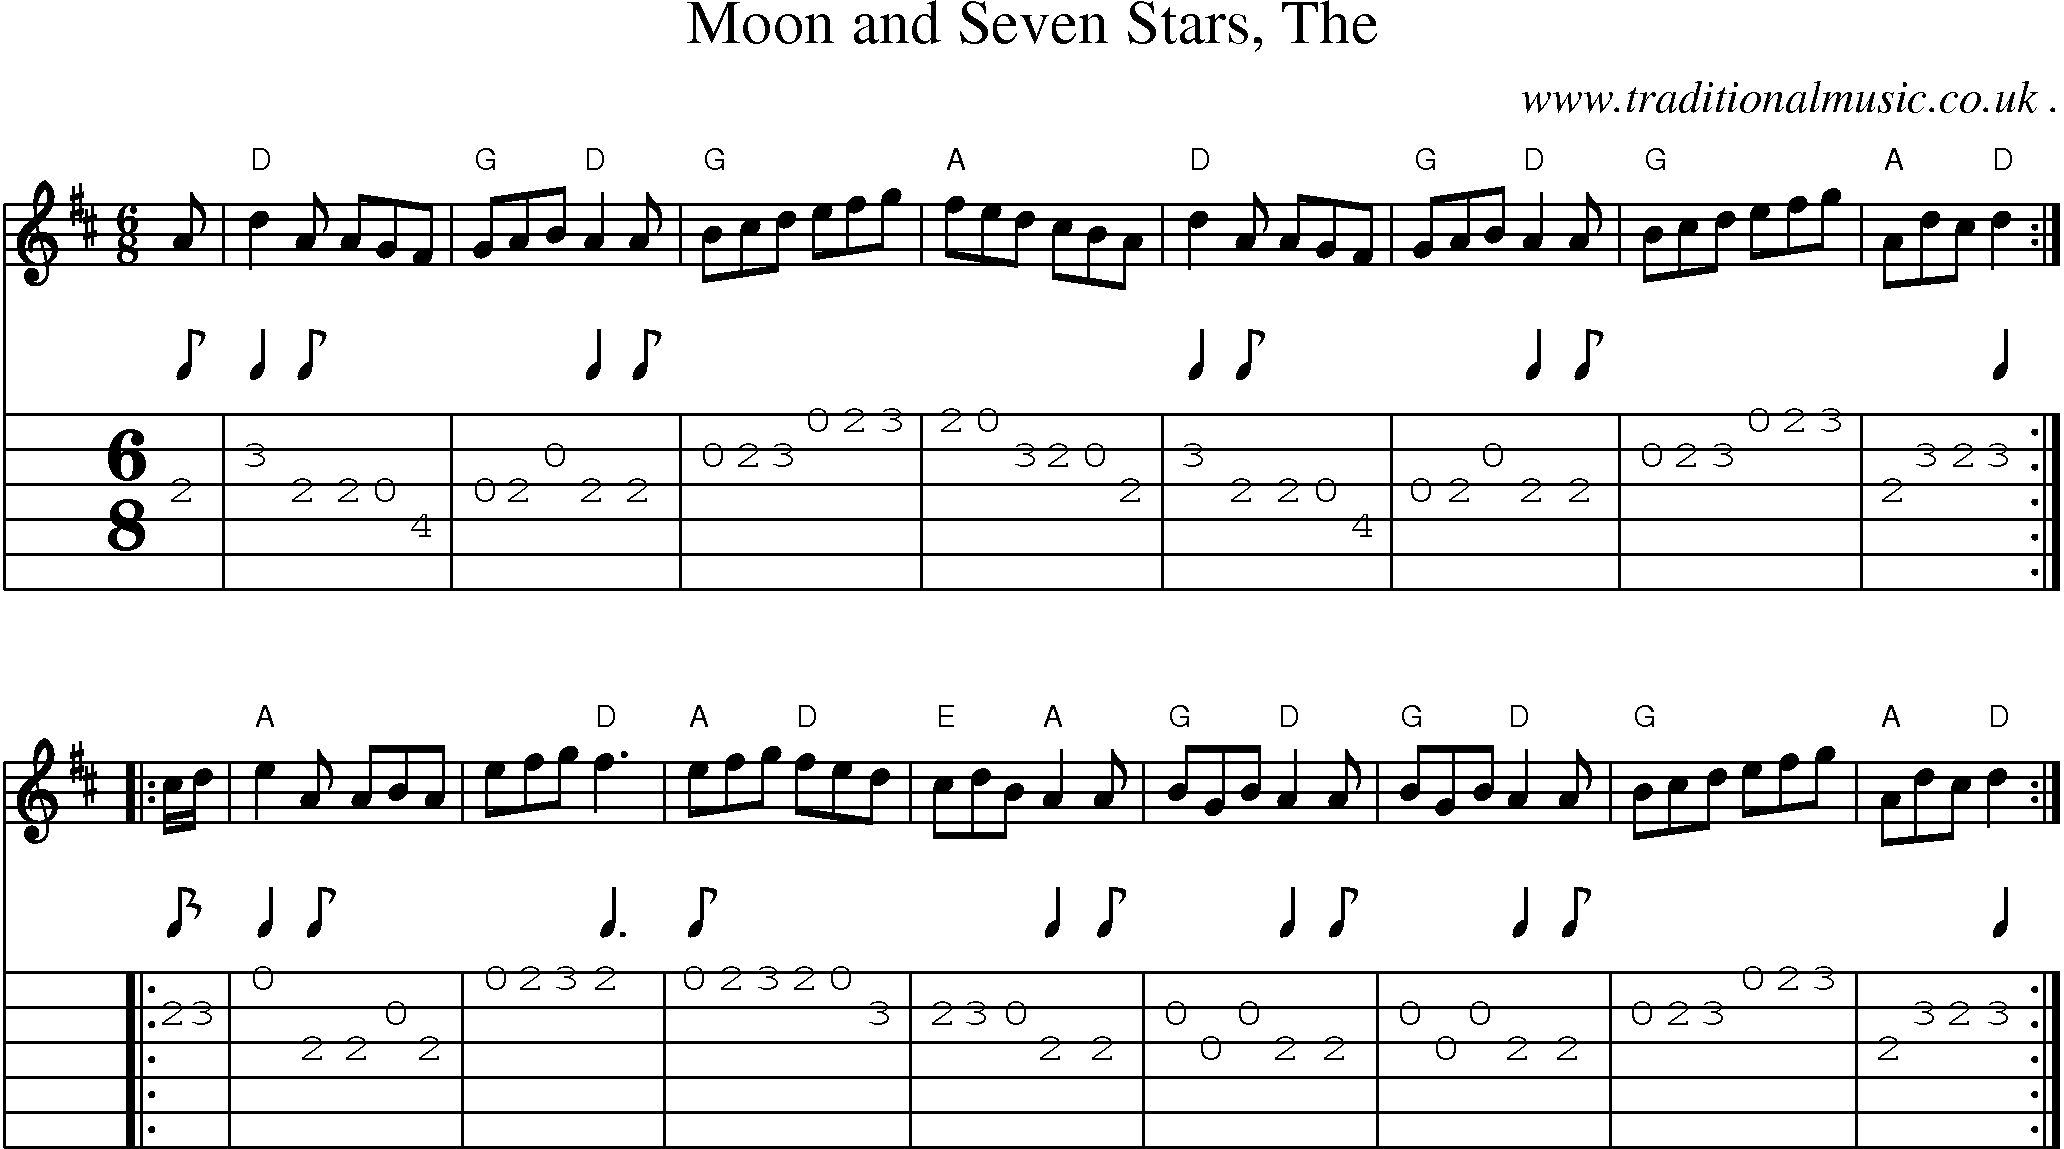 Sheet-music  score, Chords and Guitar Tabs for Moon And Seven Stars The